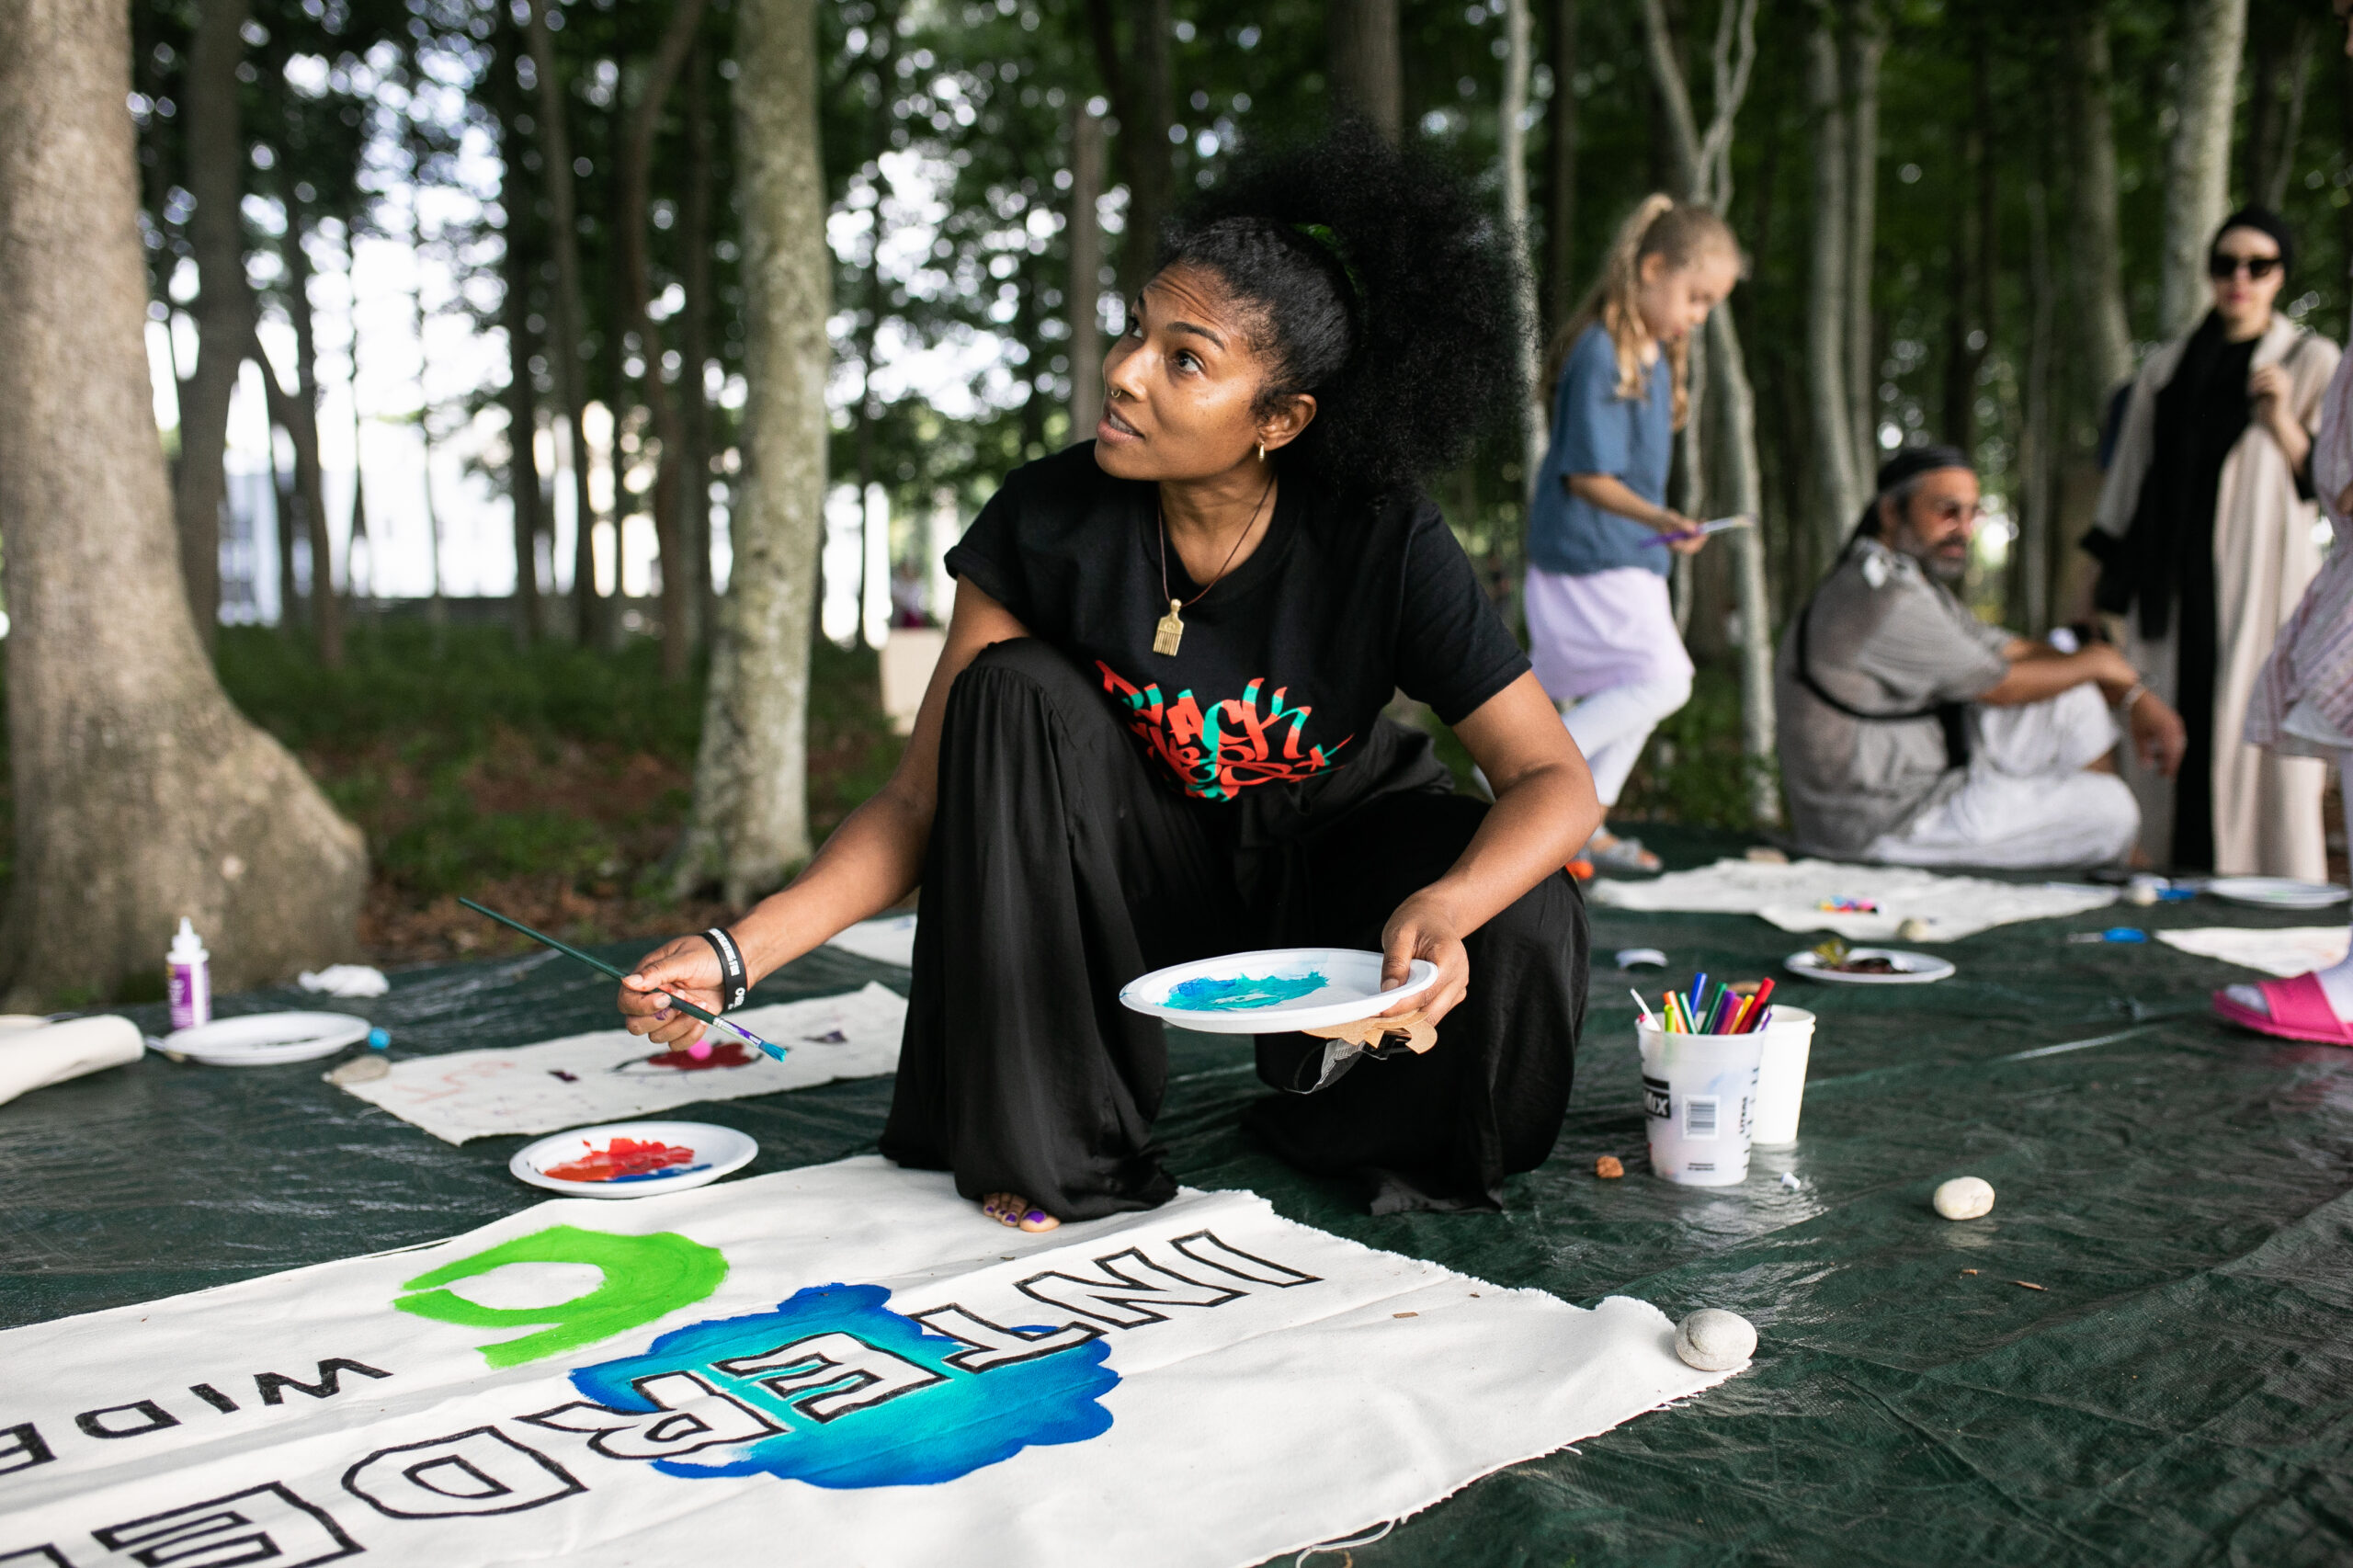 Using art to explore issues related to activism, the Watermill Center will offer a five-week program for teens. Artists engaged with visitors during a previous Community Day event. COURTESY THE WATERMILL CENTER